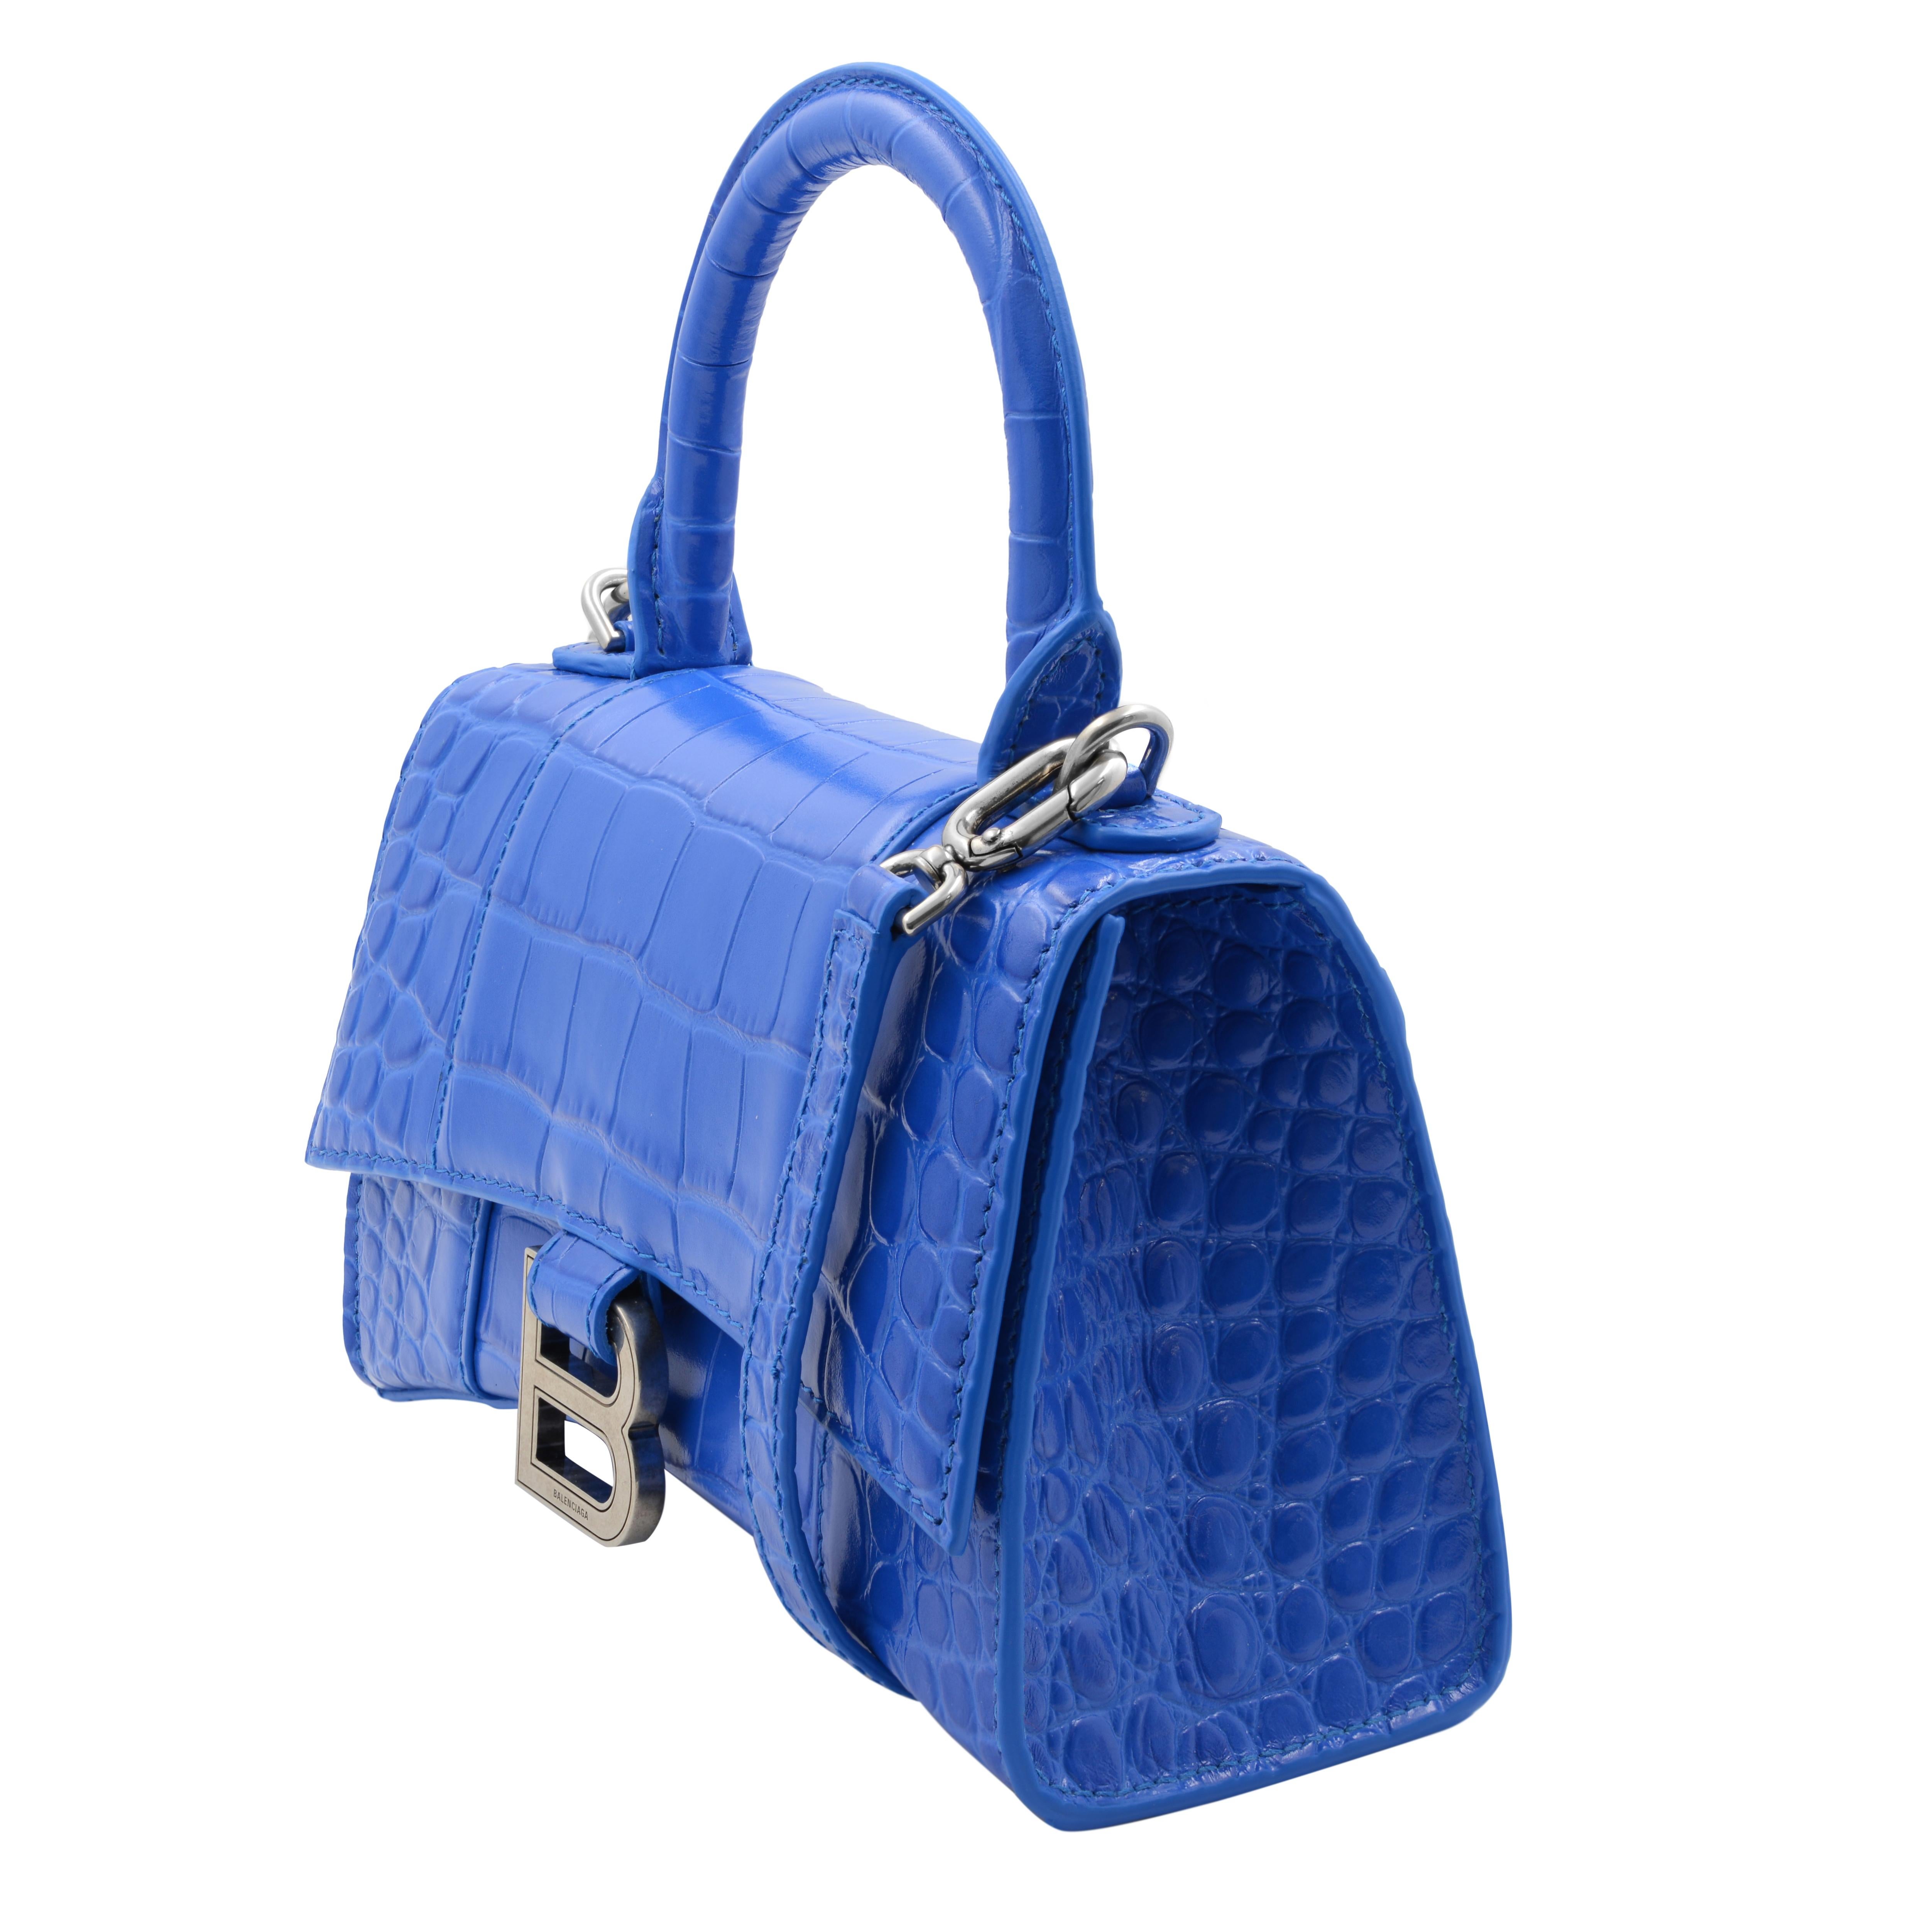 Balenciaga XS Hourglass to handle blue ladies bag. Shiny croc embossed calfskin leather with nappa lambskin leather lining and aged silver-tone hardware. Fold-over flap top closure with magnetic fastening. One main compartment. Exterior back flat